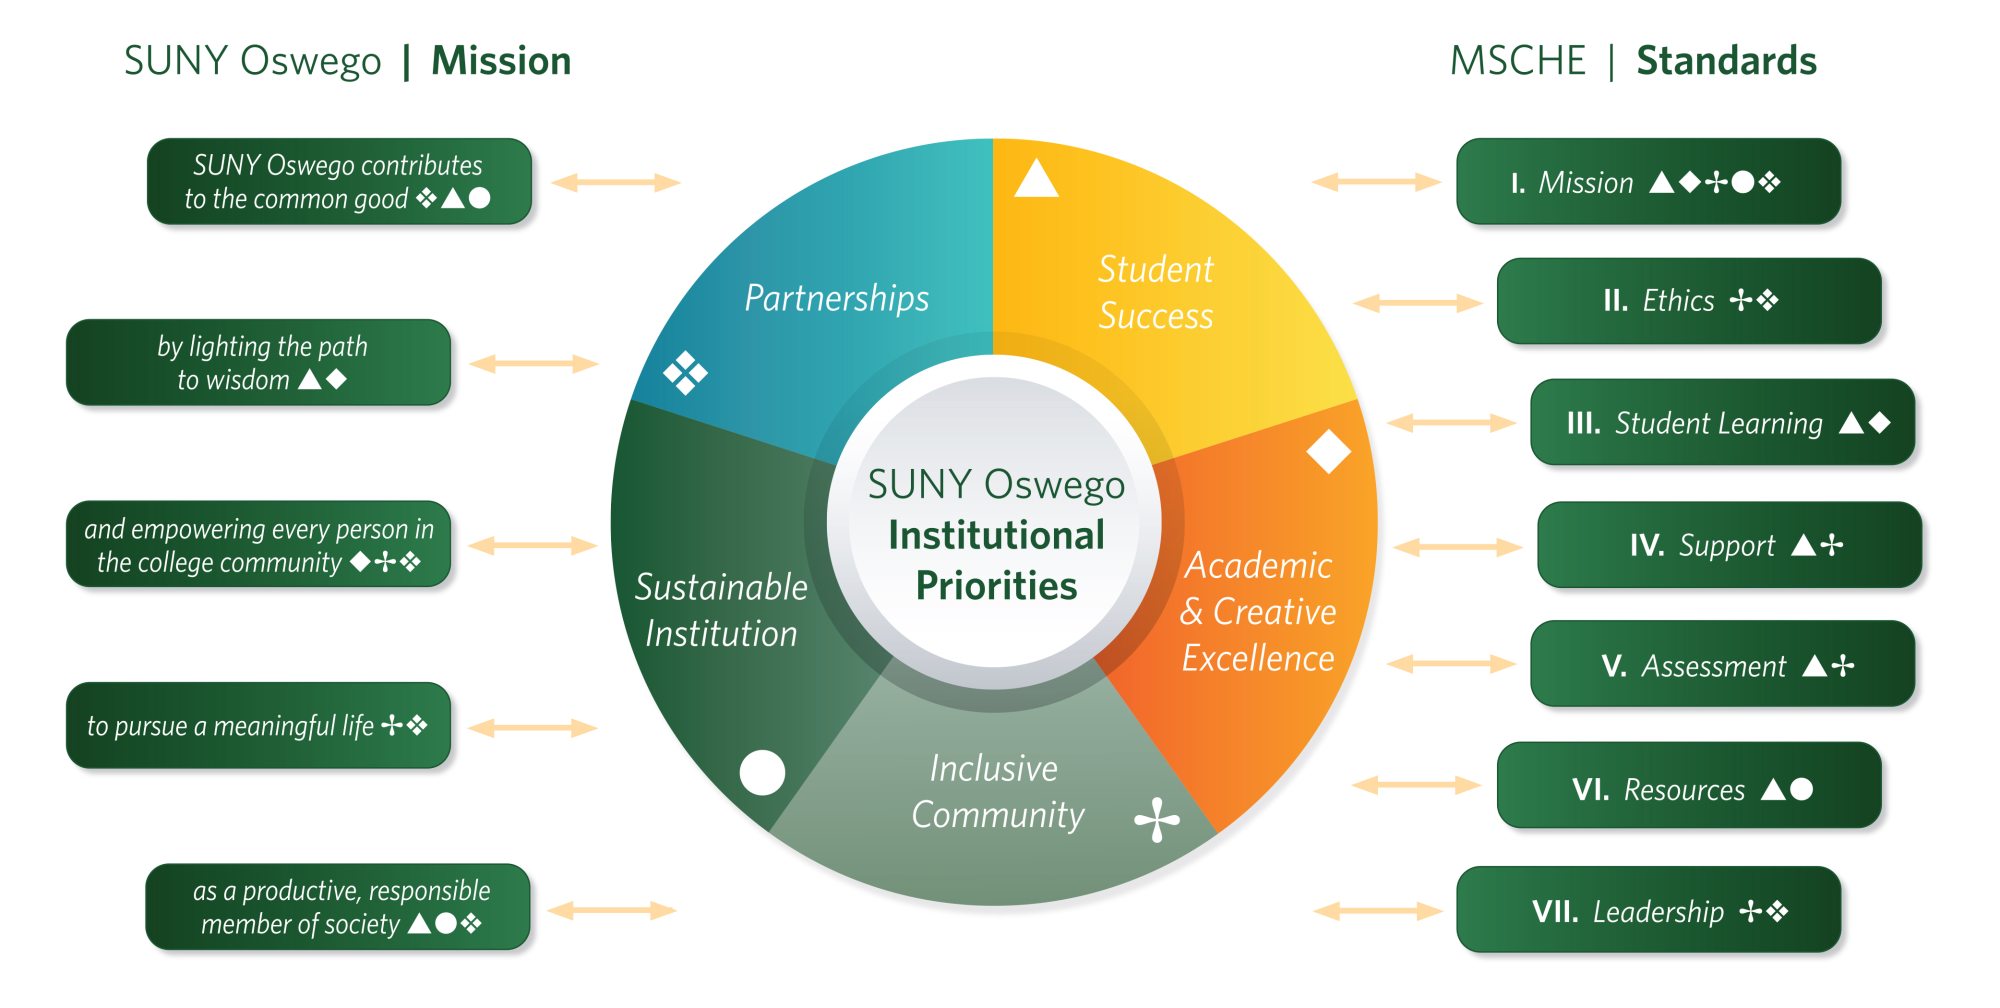 Oswego's mission compared to Middle States standards